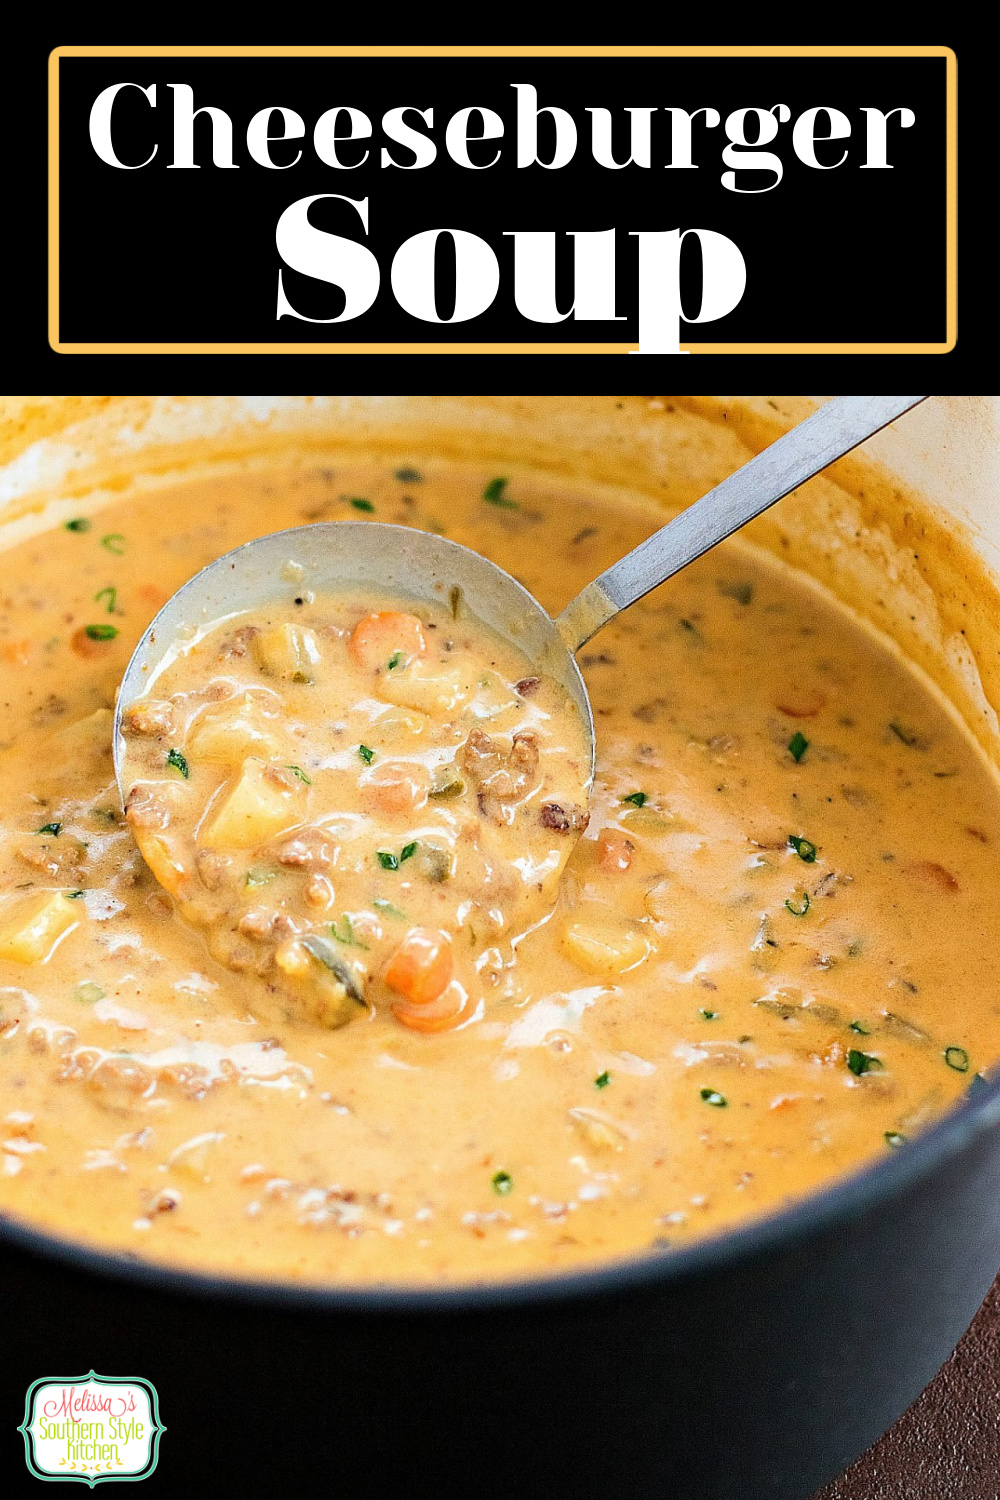 This rich and filling Cheeseburger Soup is like a burger without the bun #cheeseburgersoup #cheeseburgers #soup #souprecipes #groundbeefrecipes #burgers #easygroundbeefrecipes #dinner #dinnerideas #cheese #southernfood #southernrecipes via @melissasssk